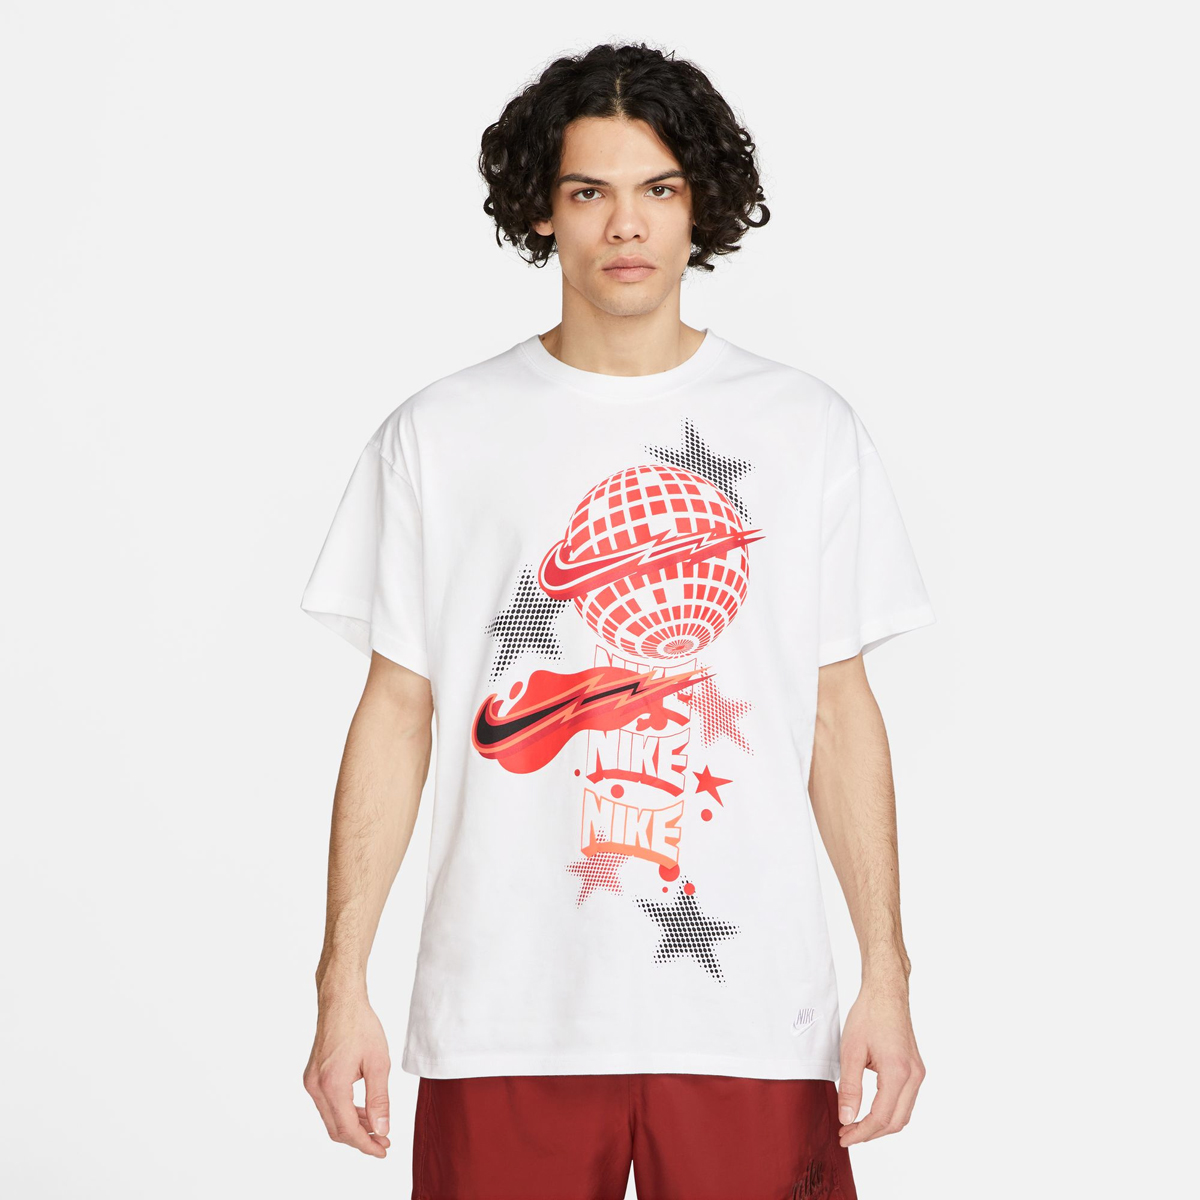 Nike-Electric-High-T-Shirt-White-Red-1